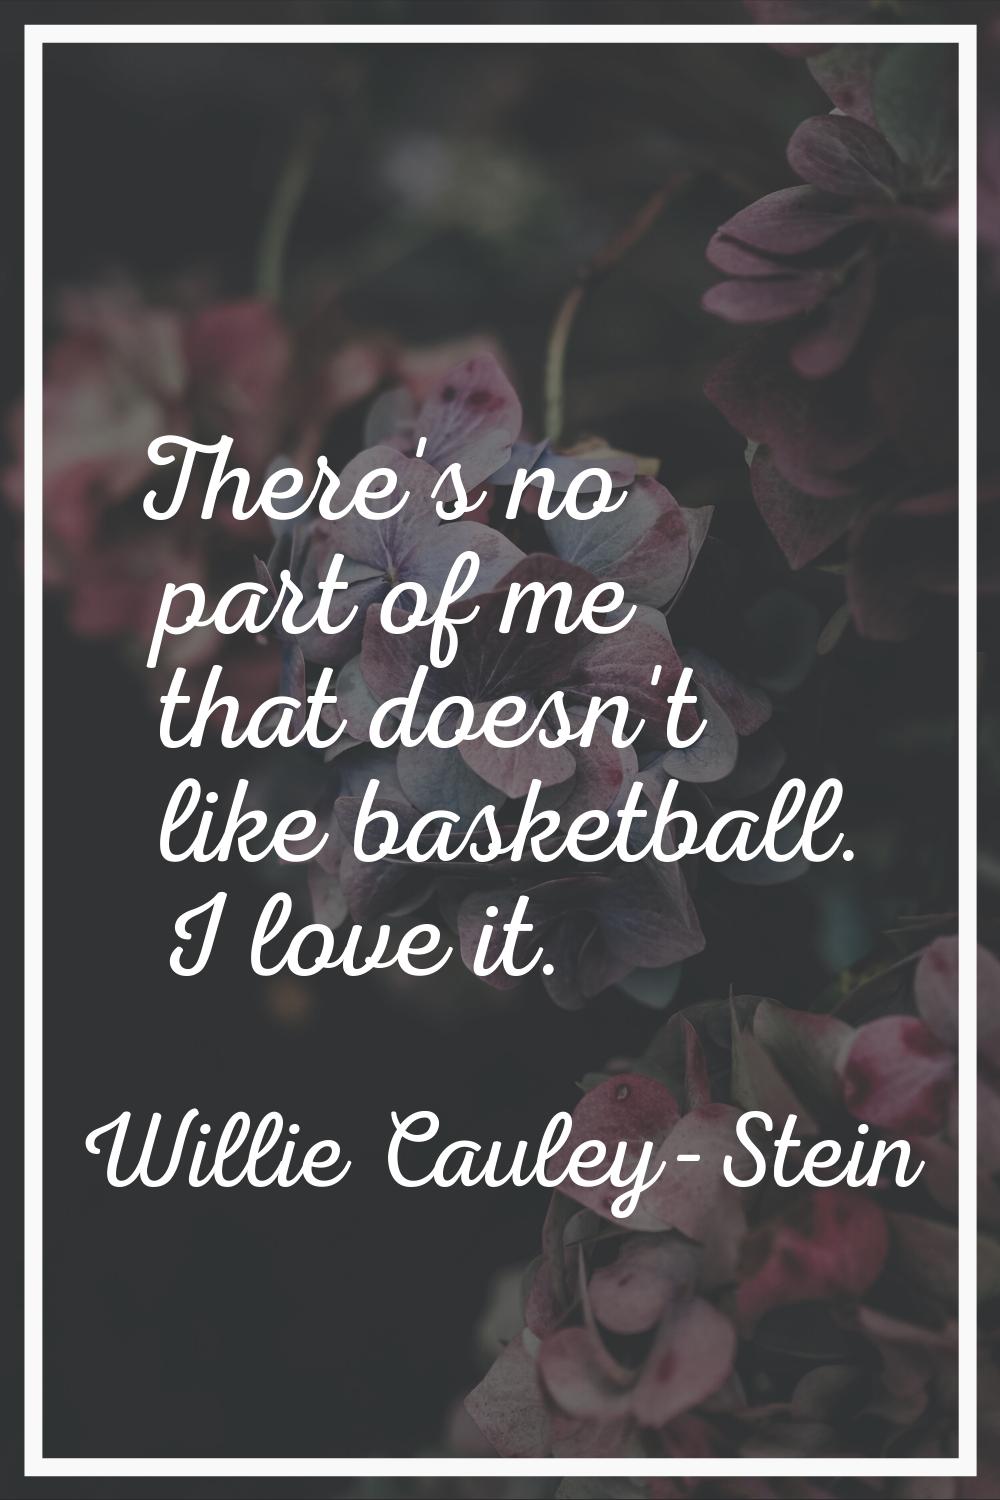 There's no part of me that doesn't like basketball. I love it.